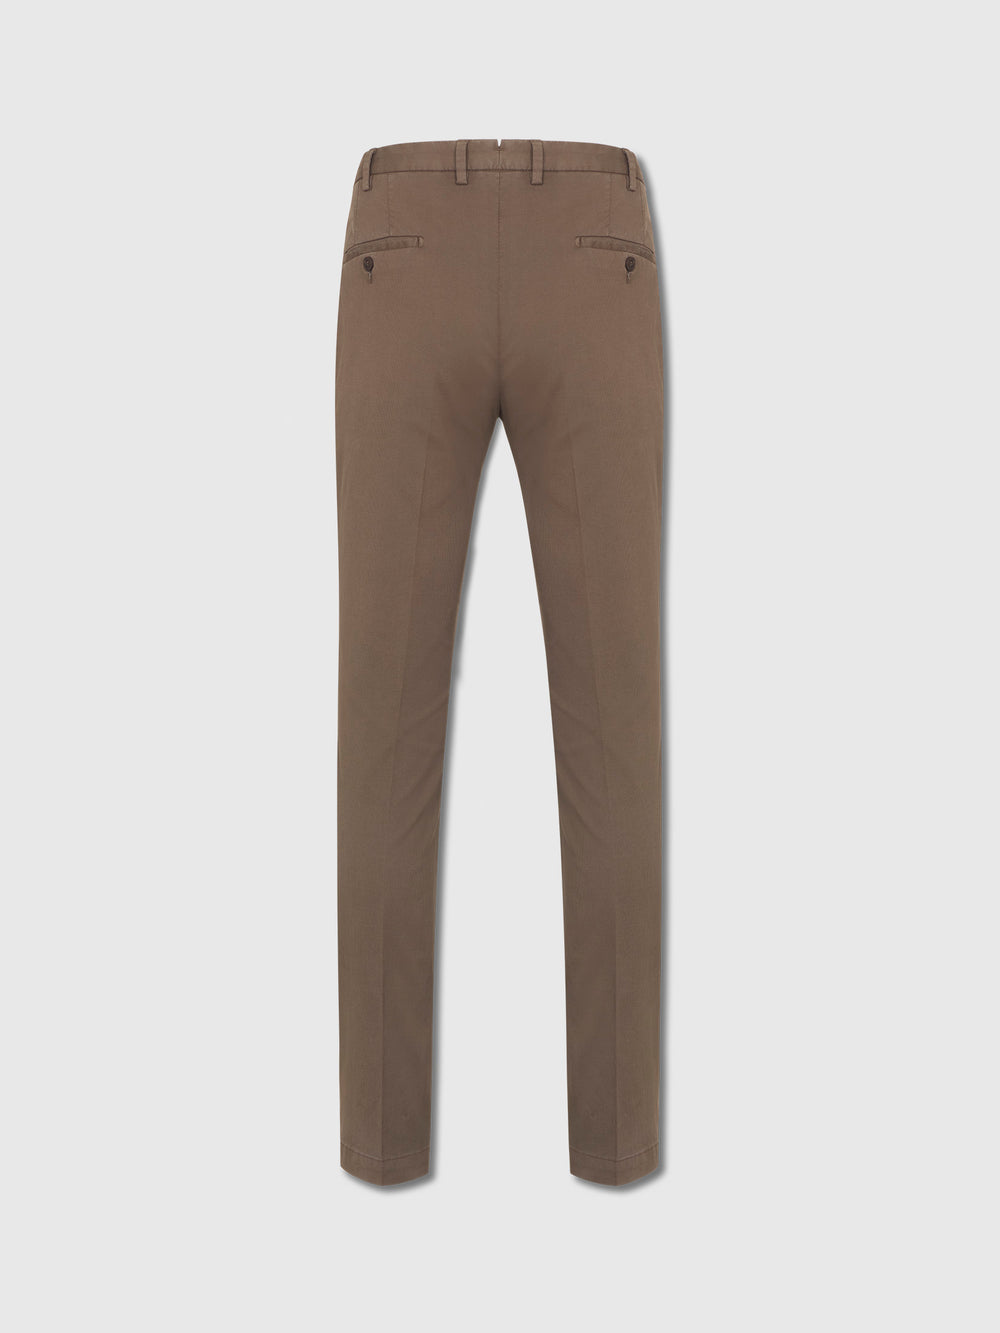 Brown Cannetté Stretchy Chino